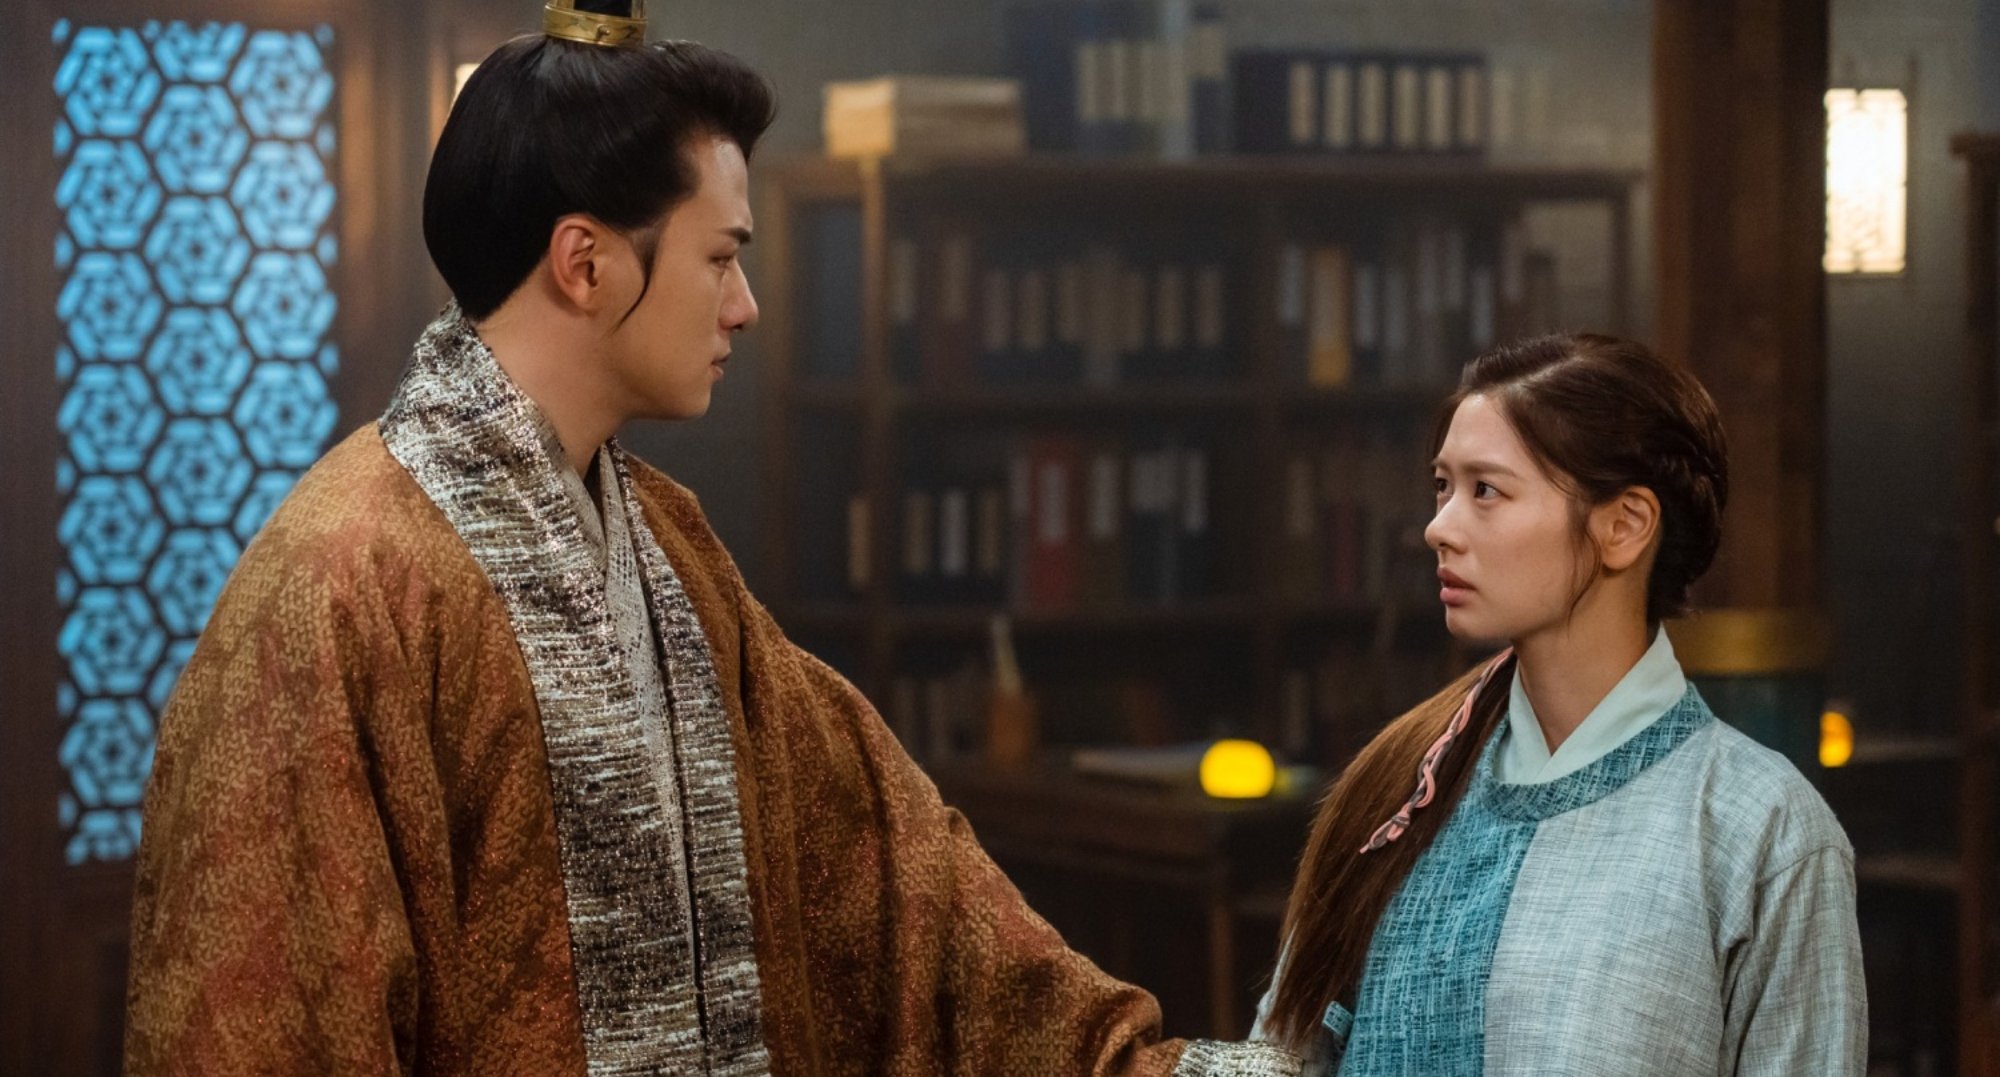 Mu-deok and the Prince in 'Alchemy of Souls' Episode 18.